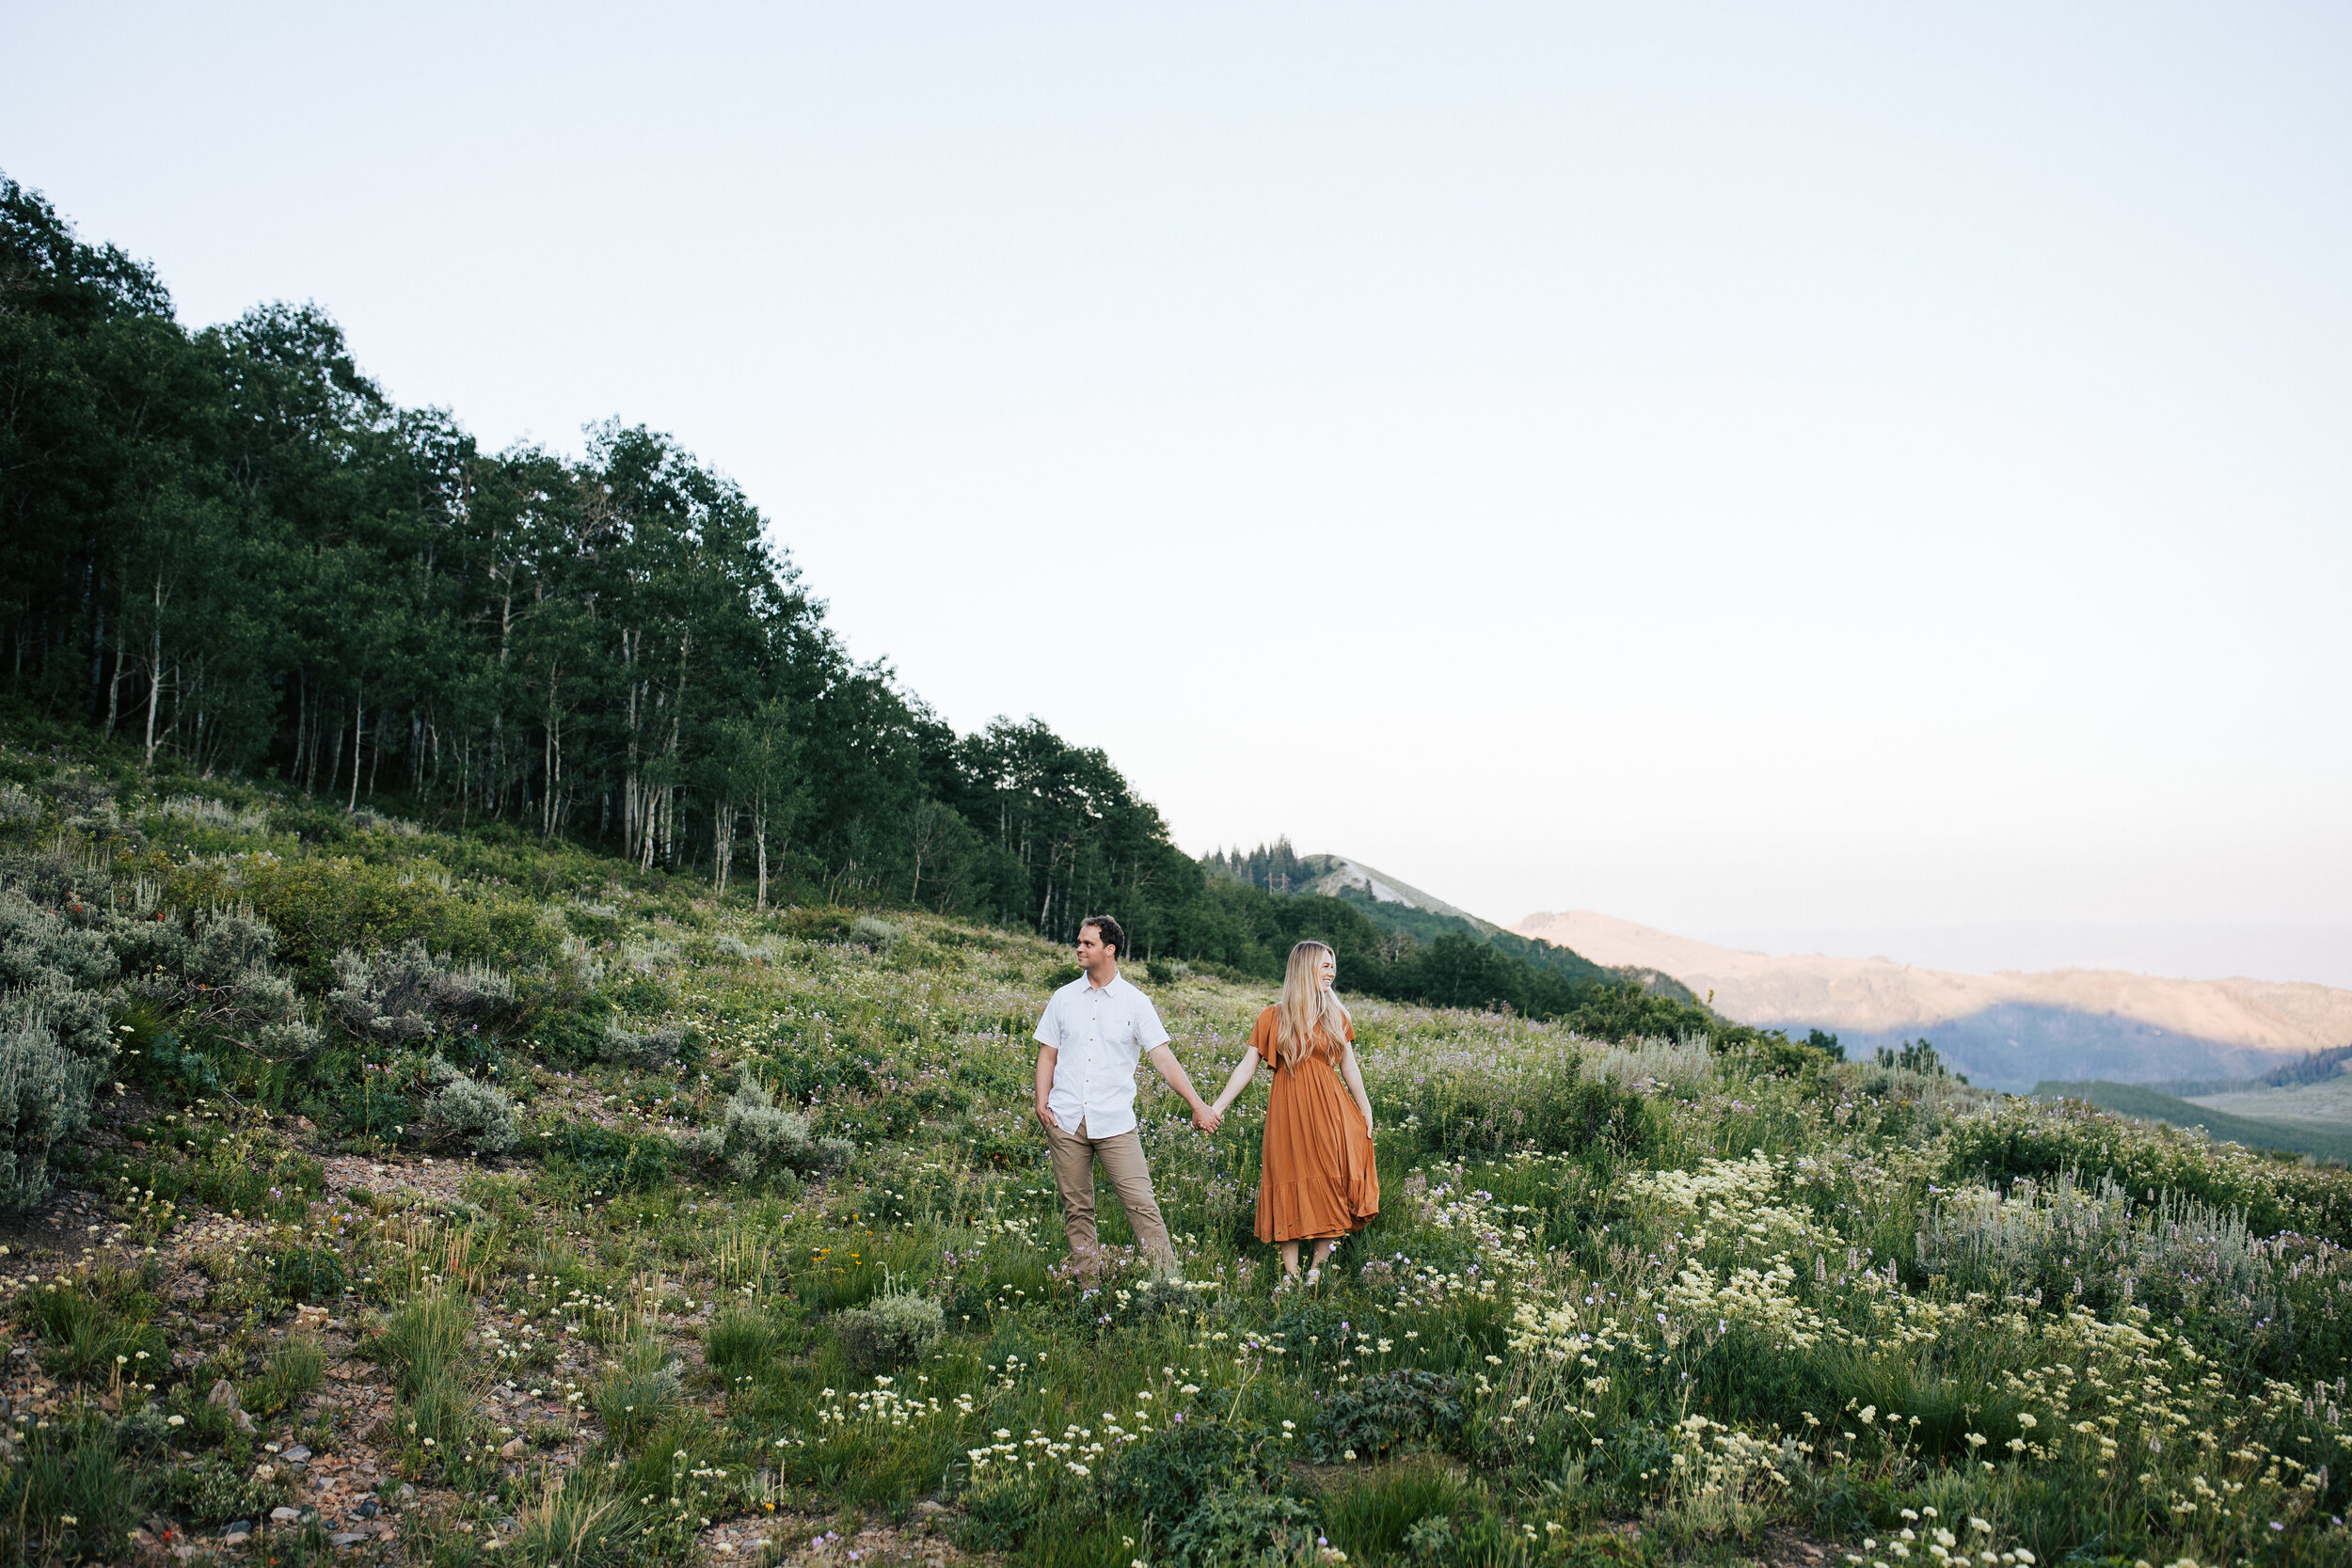  Engagement session in wildflowers in the mountains near Park City, Utah. Summertime engagement photos with mountain views. Engaged couple doing a piggyback ride in the mountains. Outfit inspo. Engagement outfits Wedding photographers in Utah county 